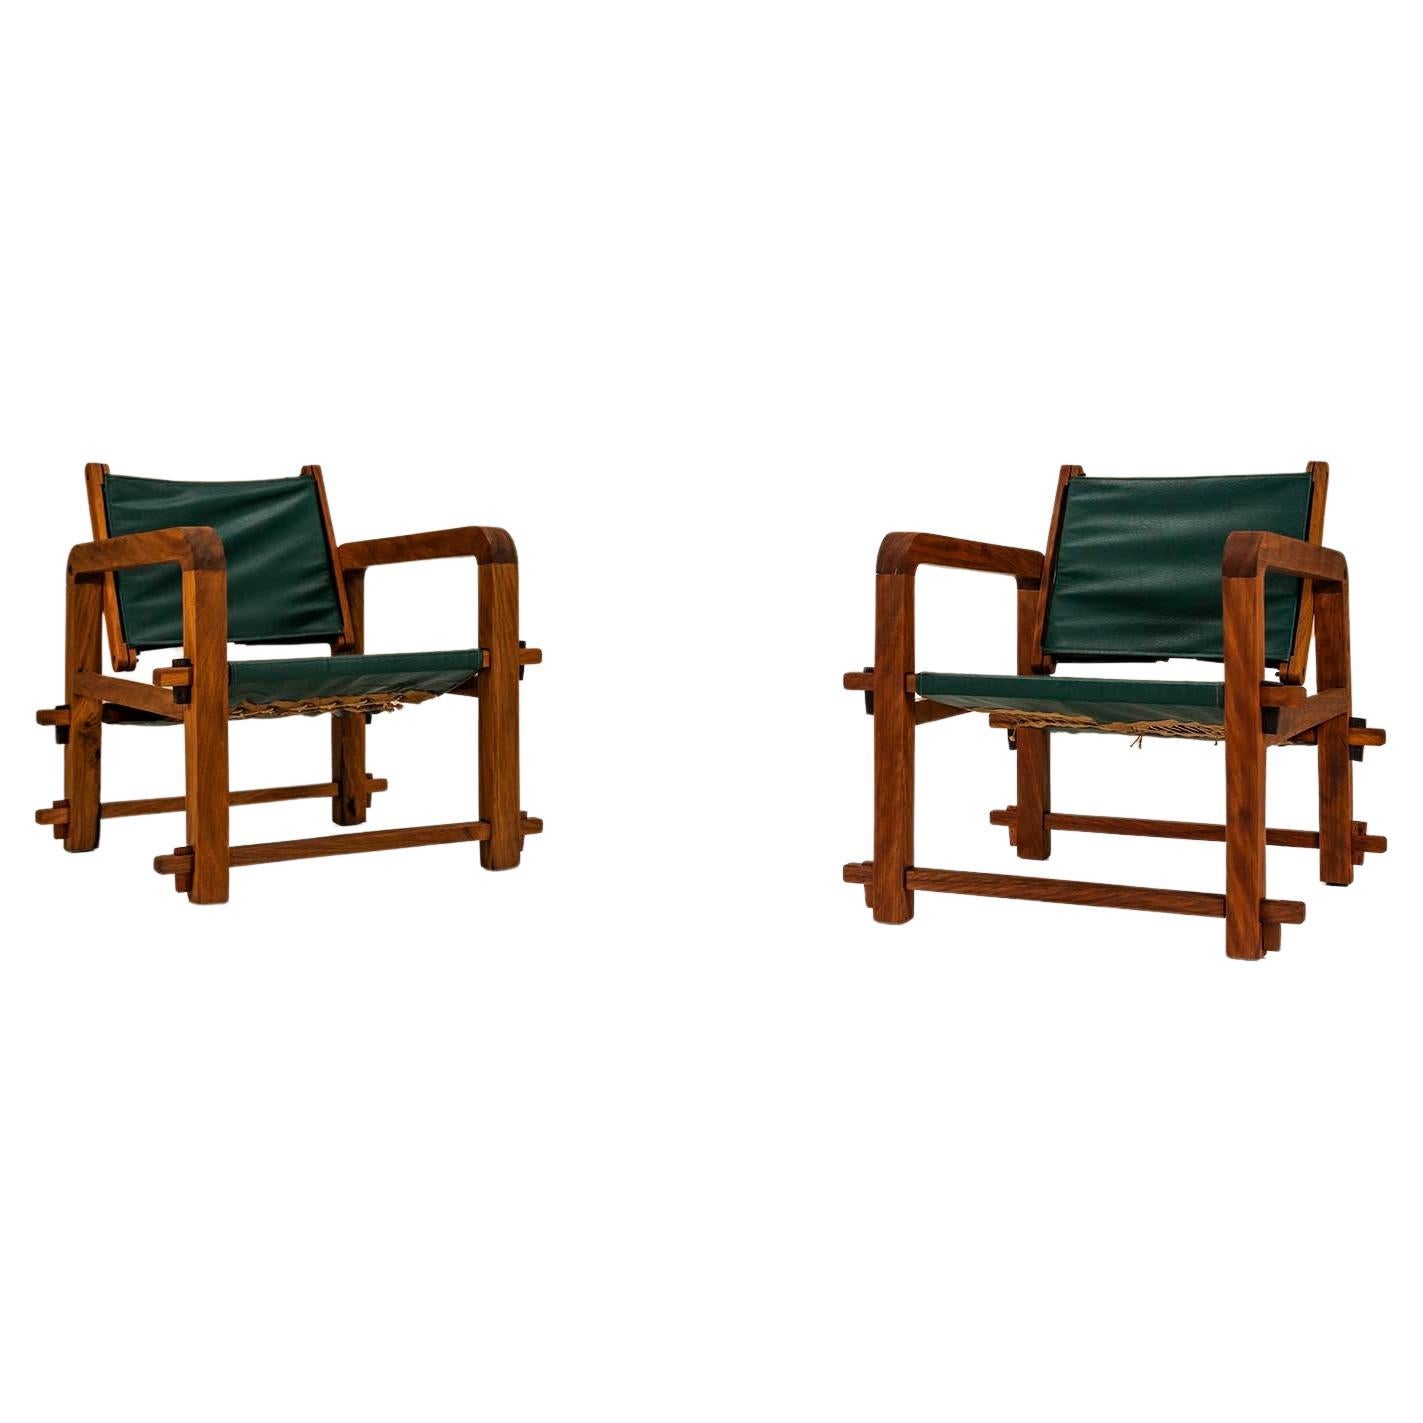 Set Of Two Sling Chairs In Mahogany And Leather, Brazil 1960s